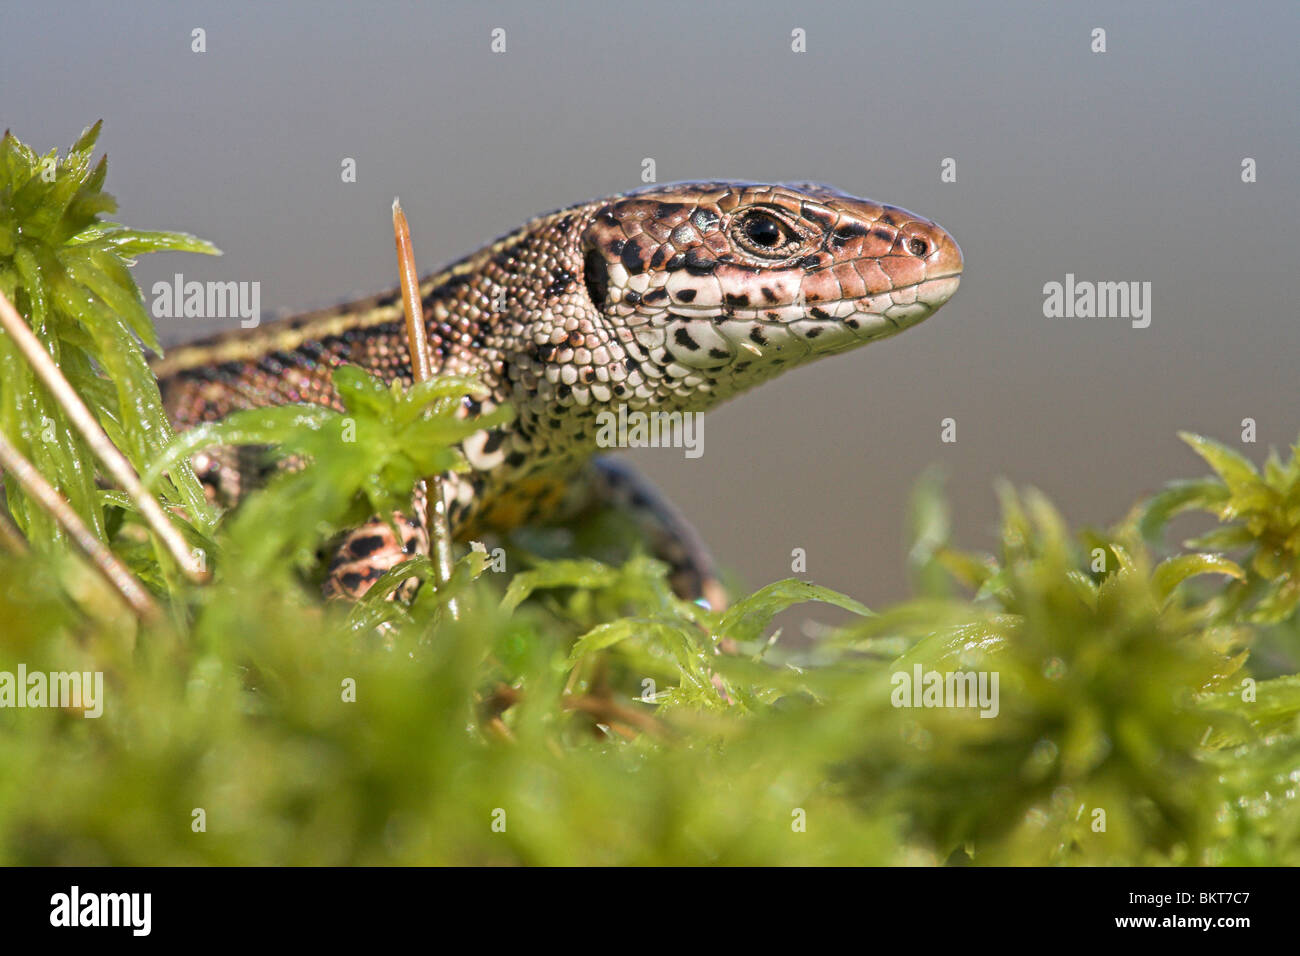 portrait of a male common lizard in early spring on sphagnum around near water Stock Photo